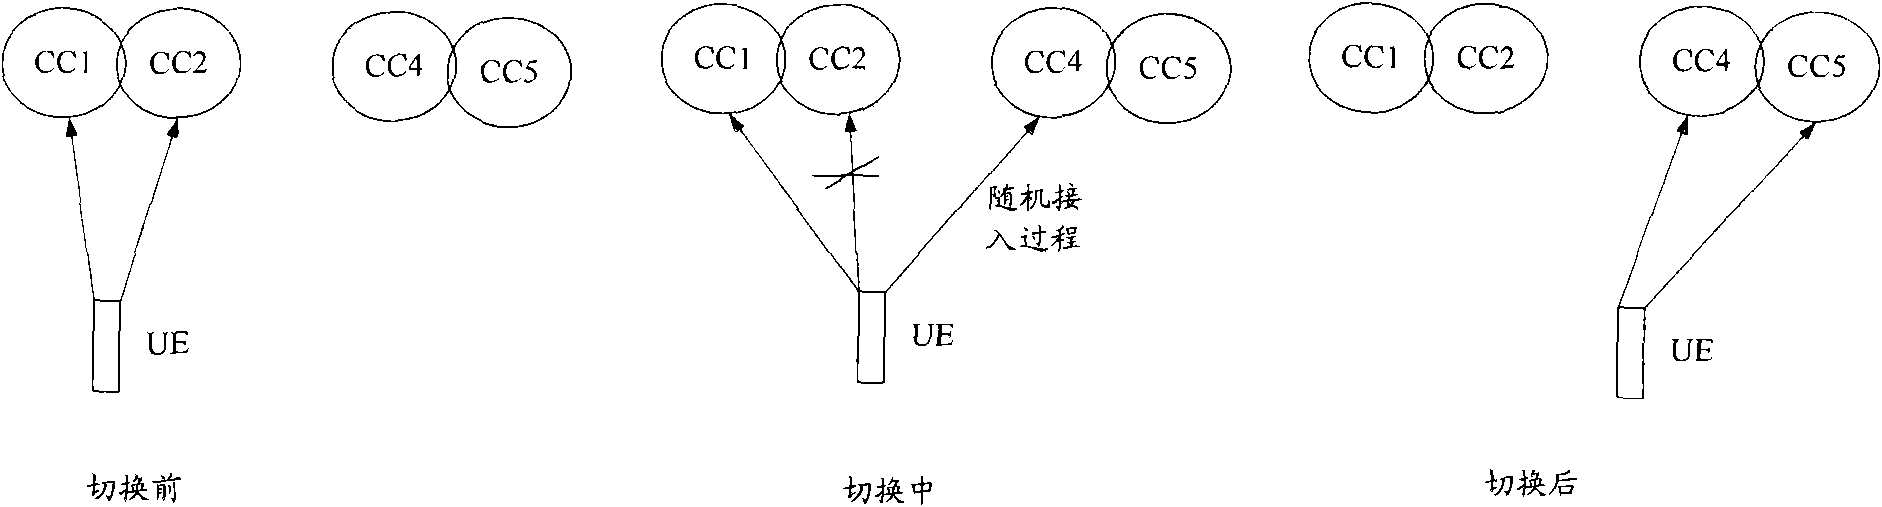 Random access method, base station, user equipment and system